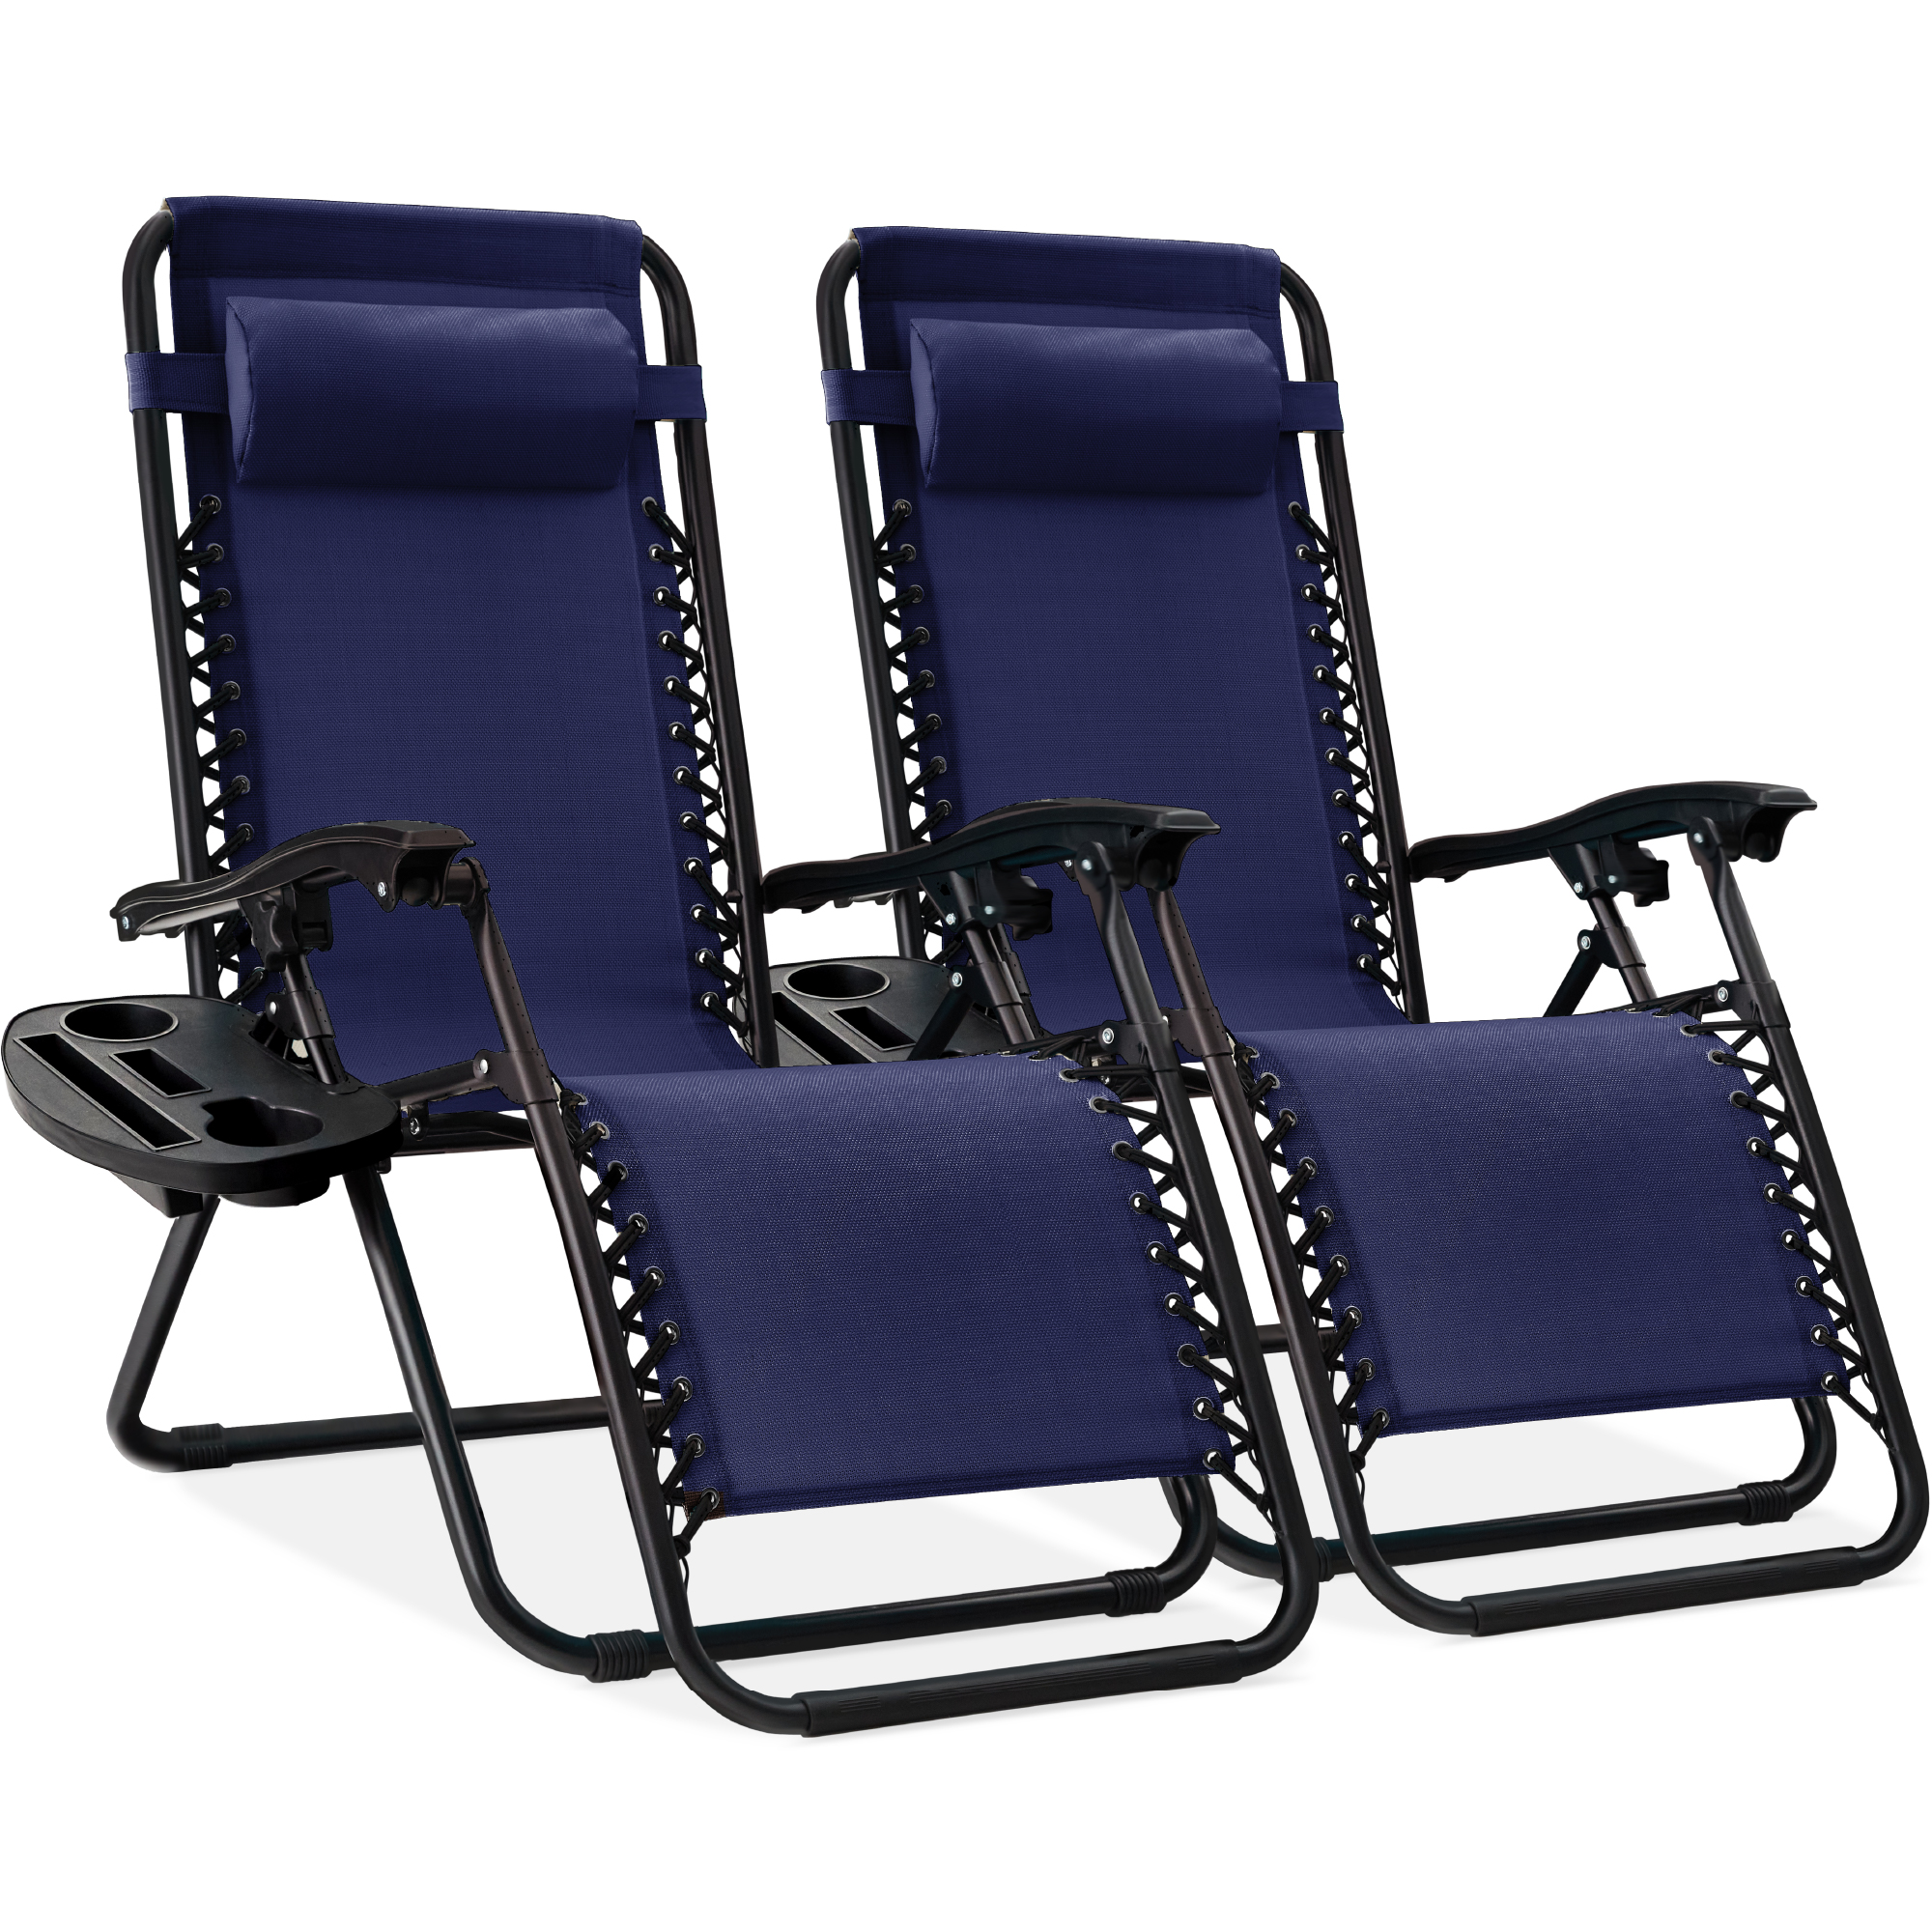 Best Choice Products Set of 2 Zero Gravity Lounge Chair Recliners for Patio, Pool w/ Cup Holder Tray - Navy Blue - image 1 of 8